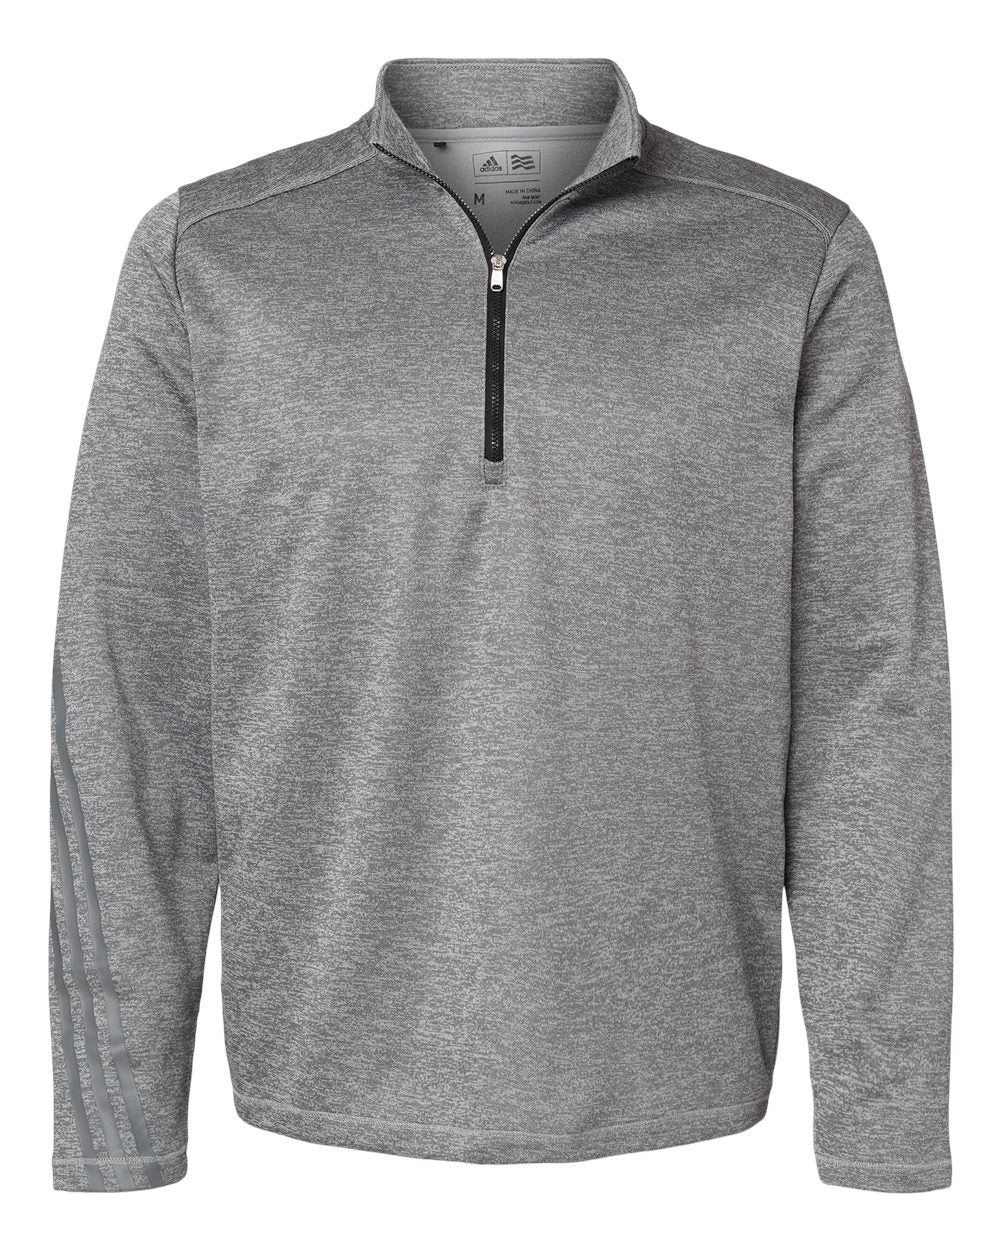 Adidas A284 Brushed Terry Heathered Quarter-Zip Pullover #color_Mid Grey Heather/ Black